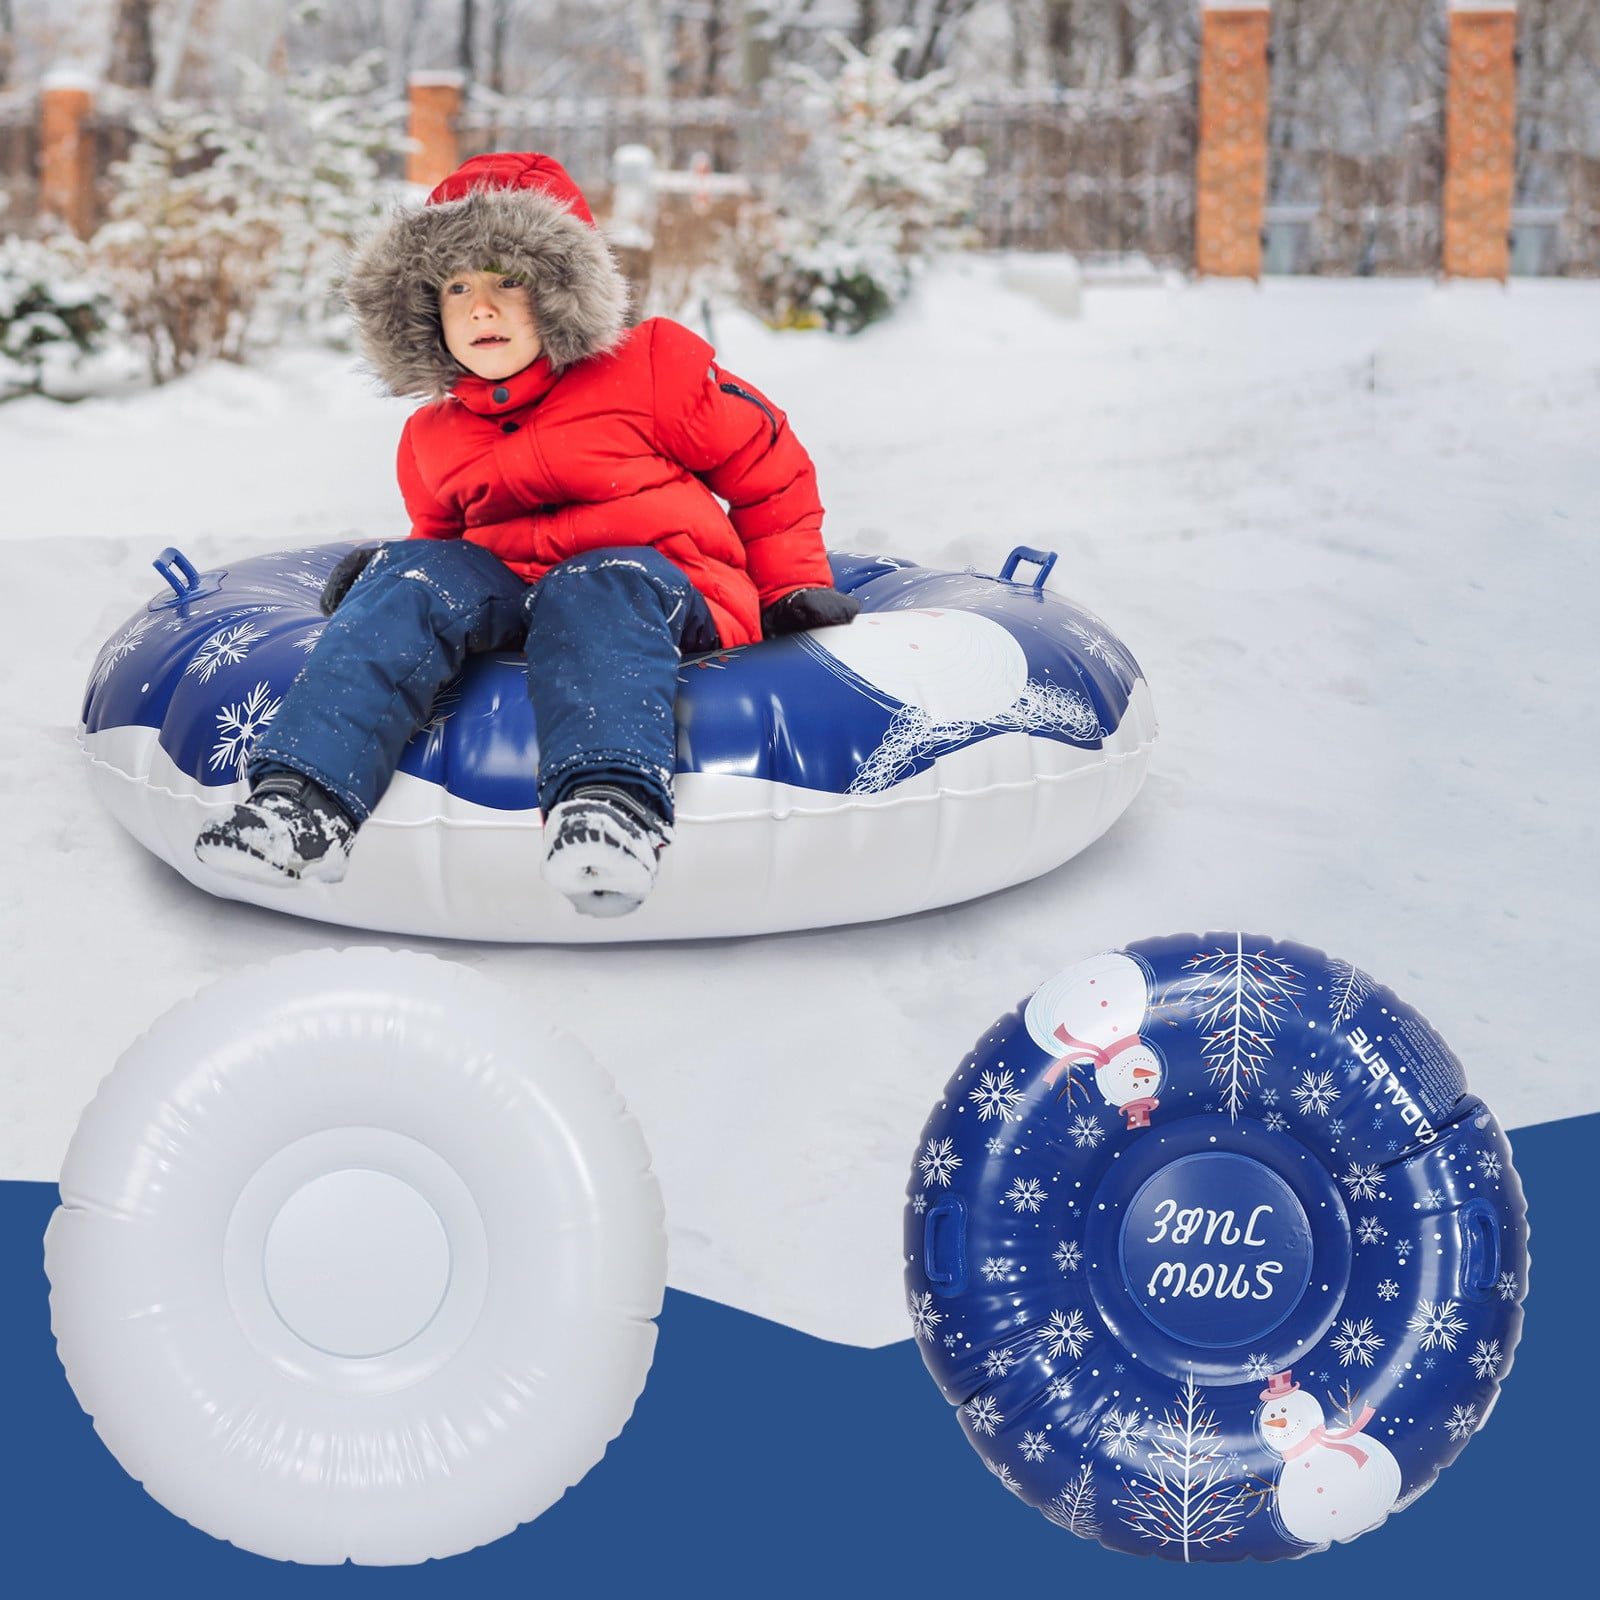 47 Inch Inflatable Snow Tube,Snow Tubes for Sledding Heavy Duty Inflatable Snow Tube for Adults Kids,0.6mm Thickening PVC Snow Sled with Higher Handles for Sledding 